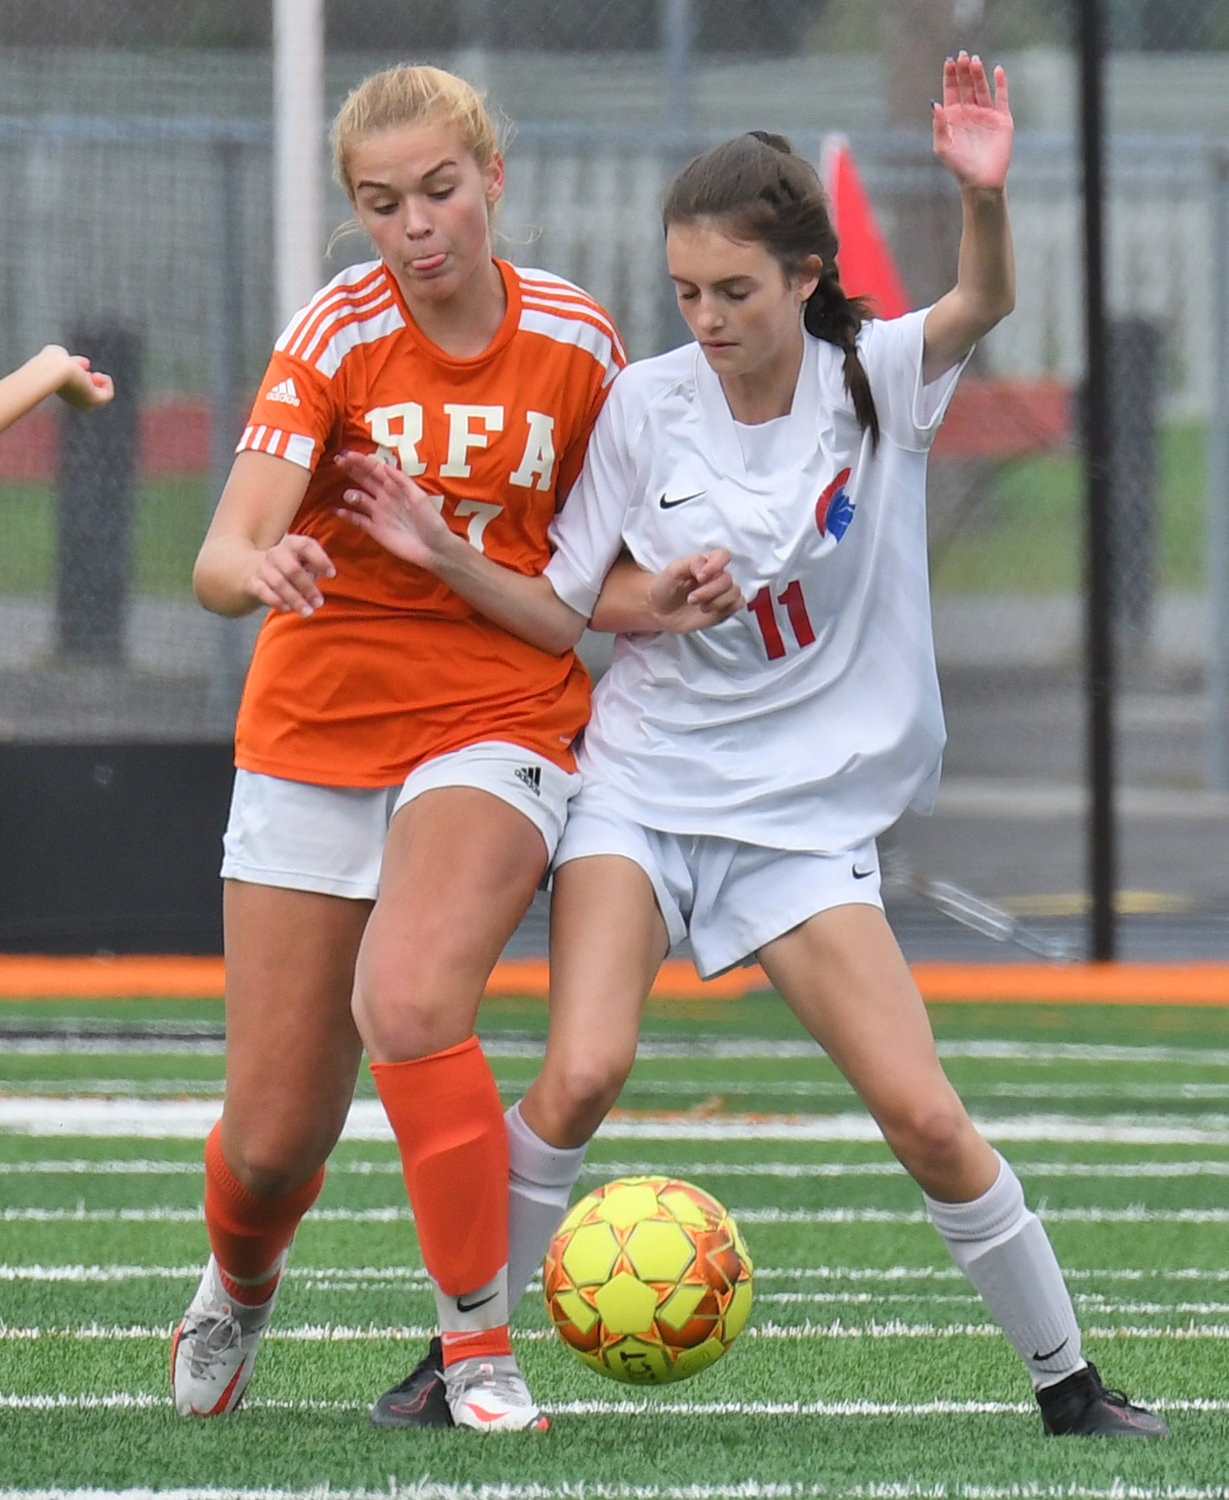 Rome Free Academy's Amelia Furbeck and New Hartford's Kacey Richards fight for the ball during the first half Thursday at RFA Stadium. New Hartford earned the win and improved to 8-0-1 this season. RFA is 5-4 overall.